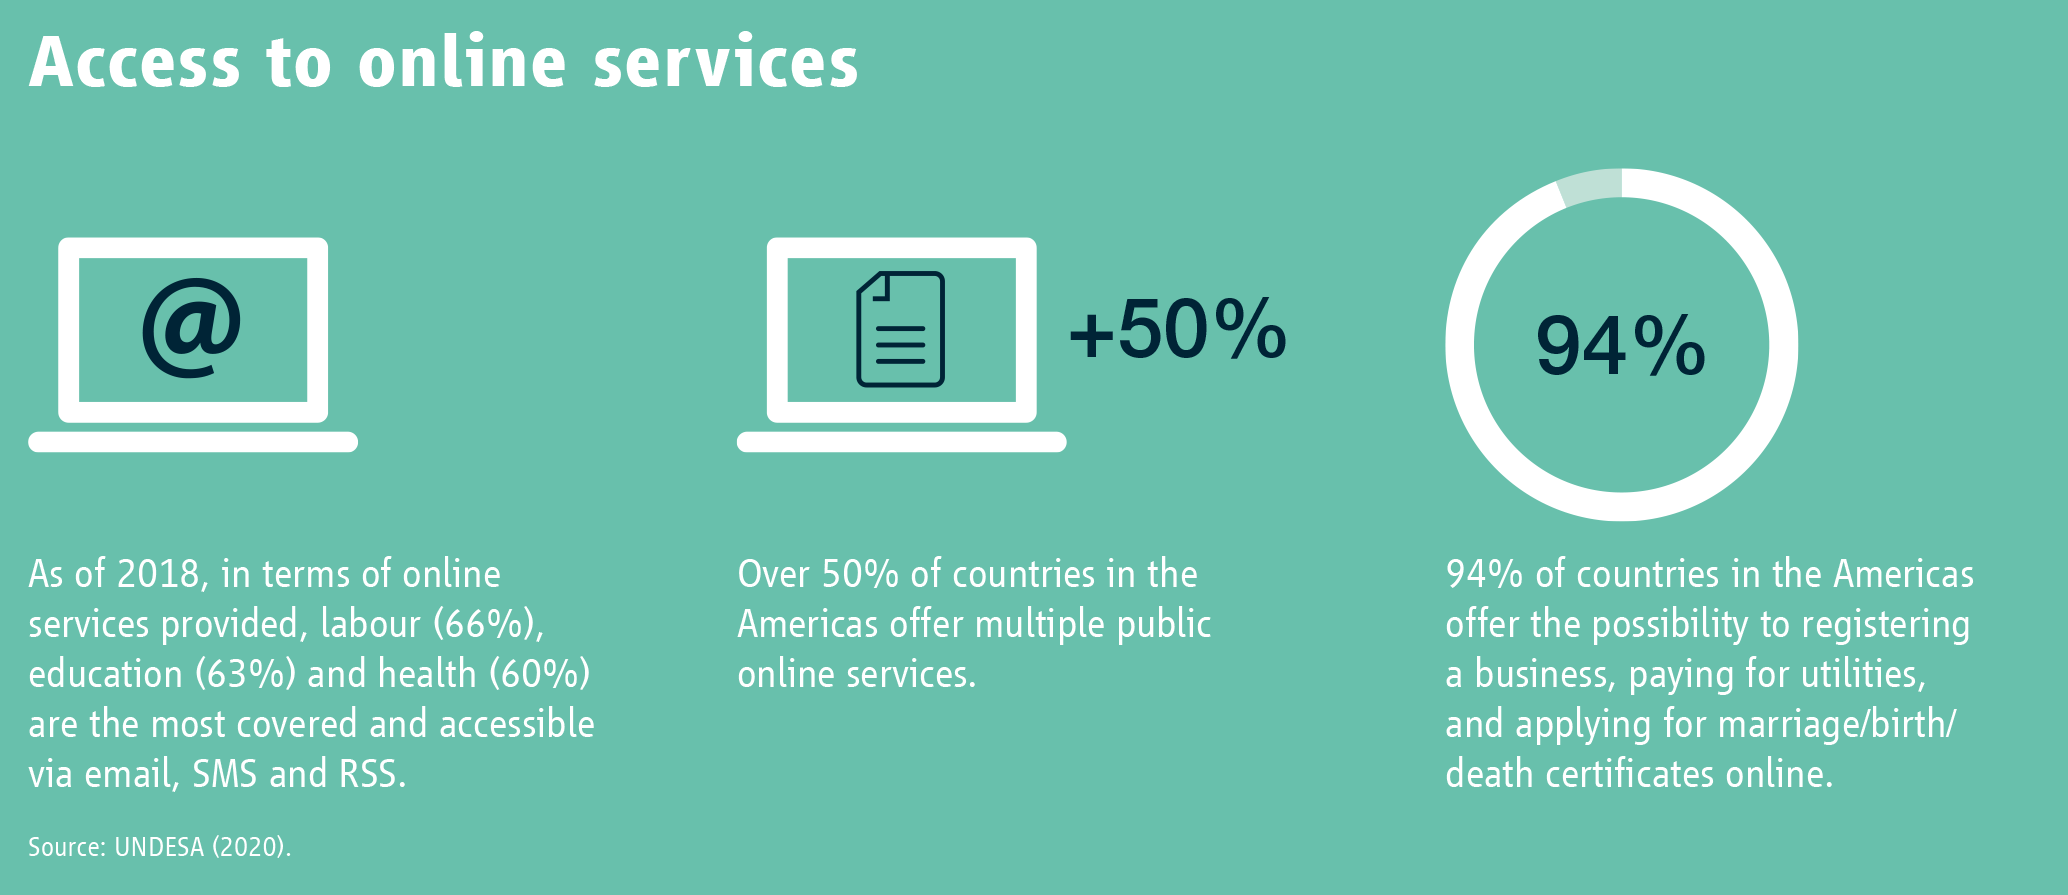 Access to online services